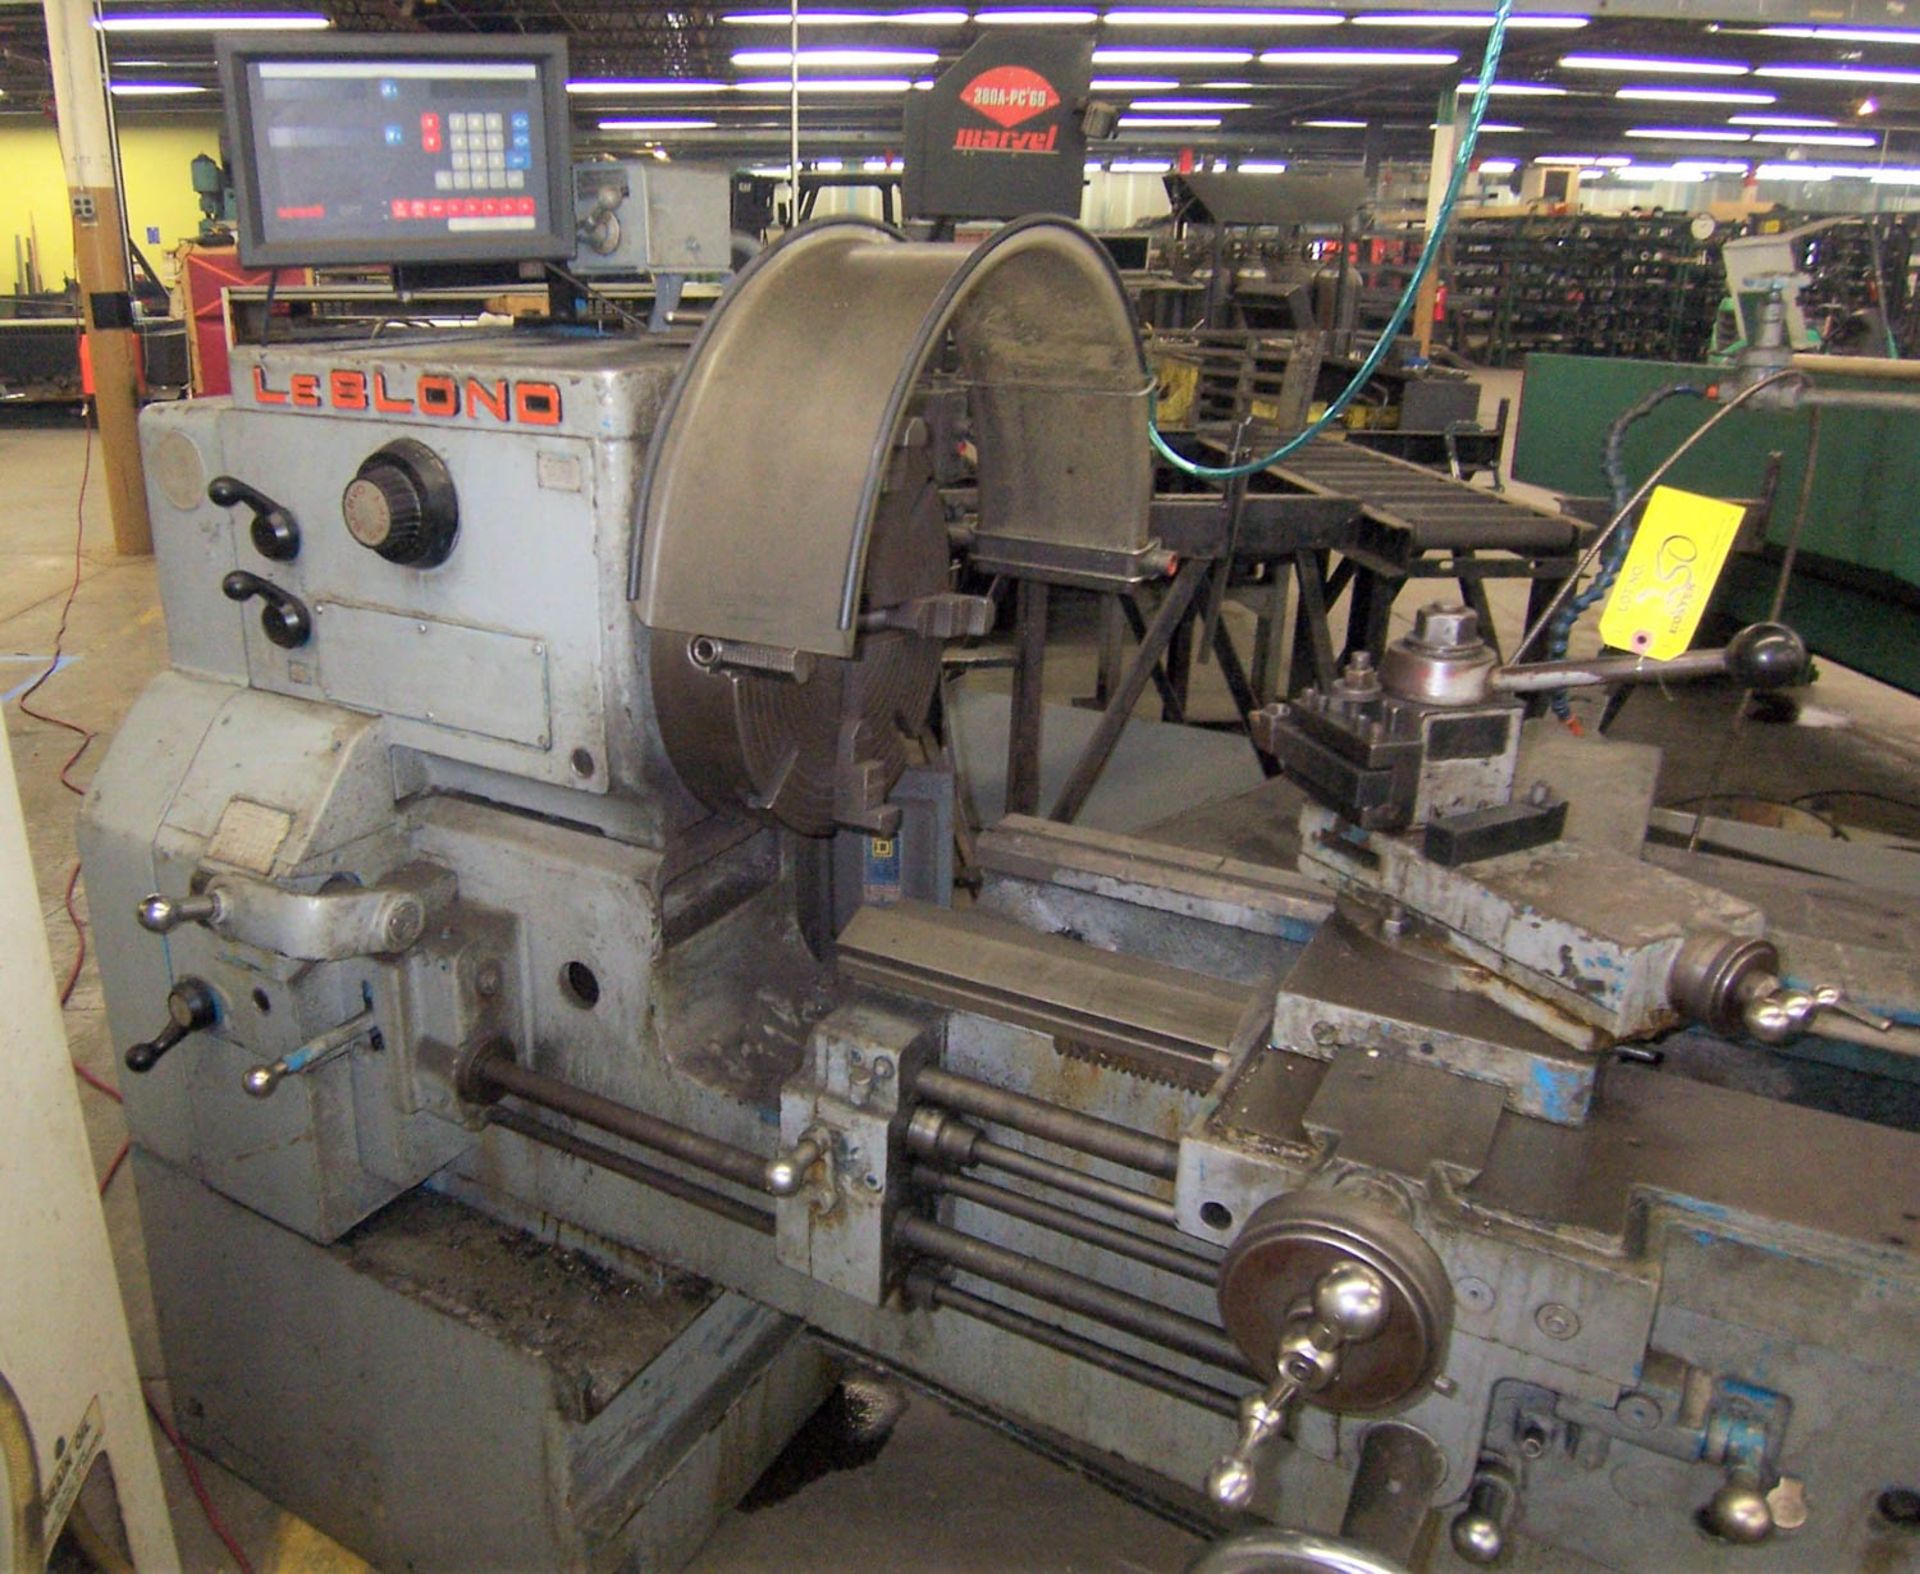 19"/35" X 60"/85" (APPROXIMATELY) LEBLOND REGAL SLIDING GAP BED LATHE, WITH NEWALL DP-7 DIGITAL - Image 2 of 11